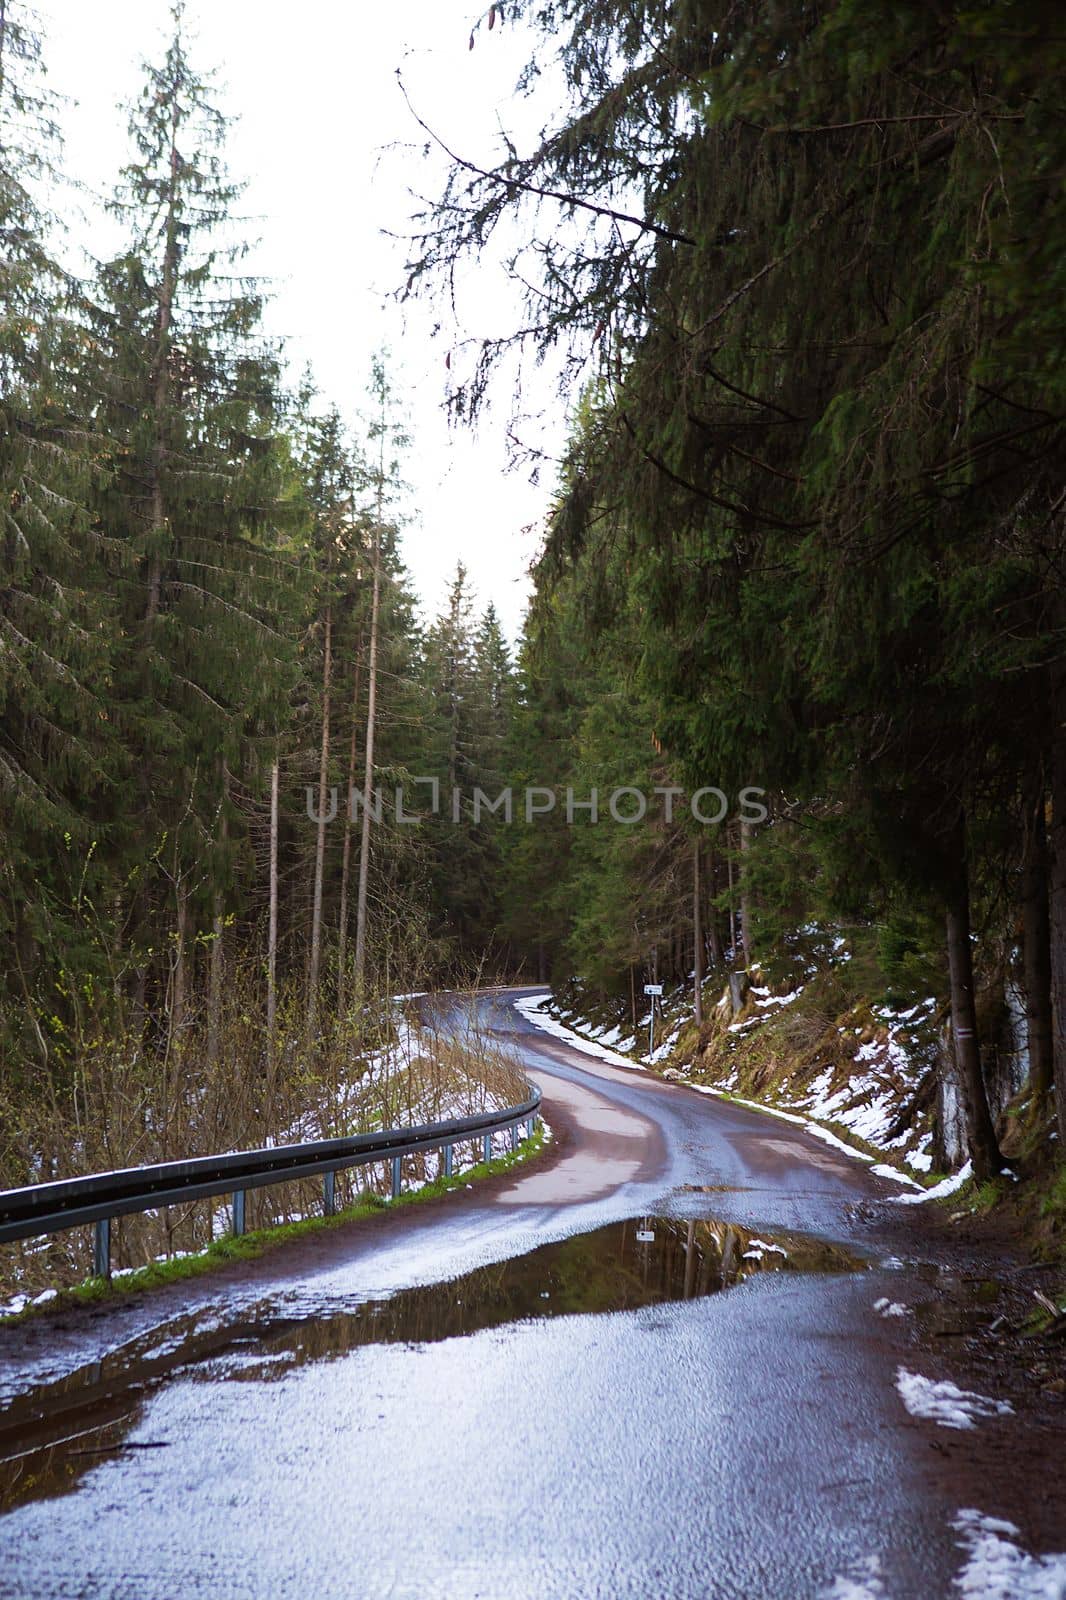 The road in the forest among the dense forest, Christmas trees, pine trees. Snow lies by sfinks